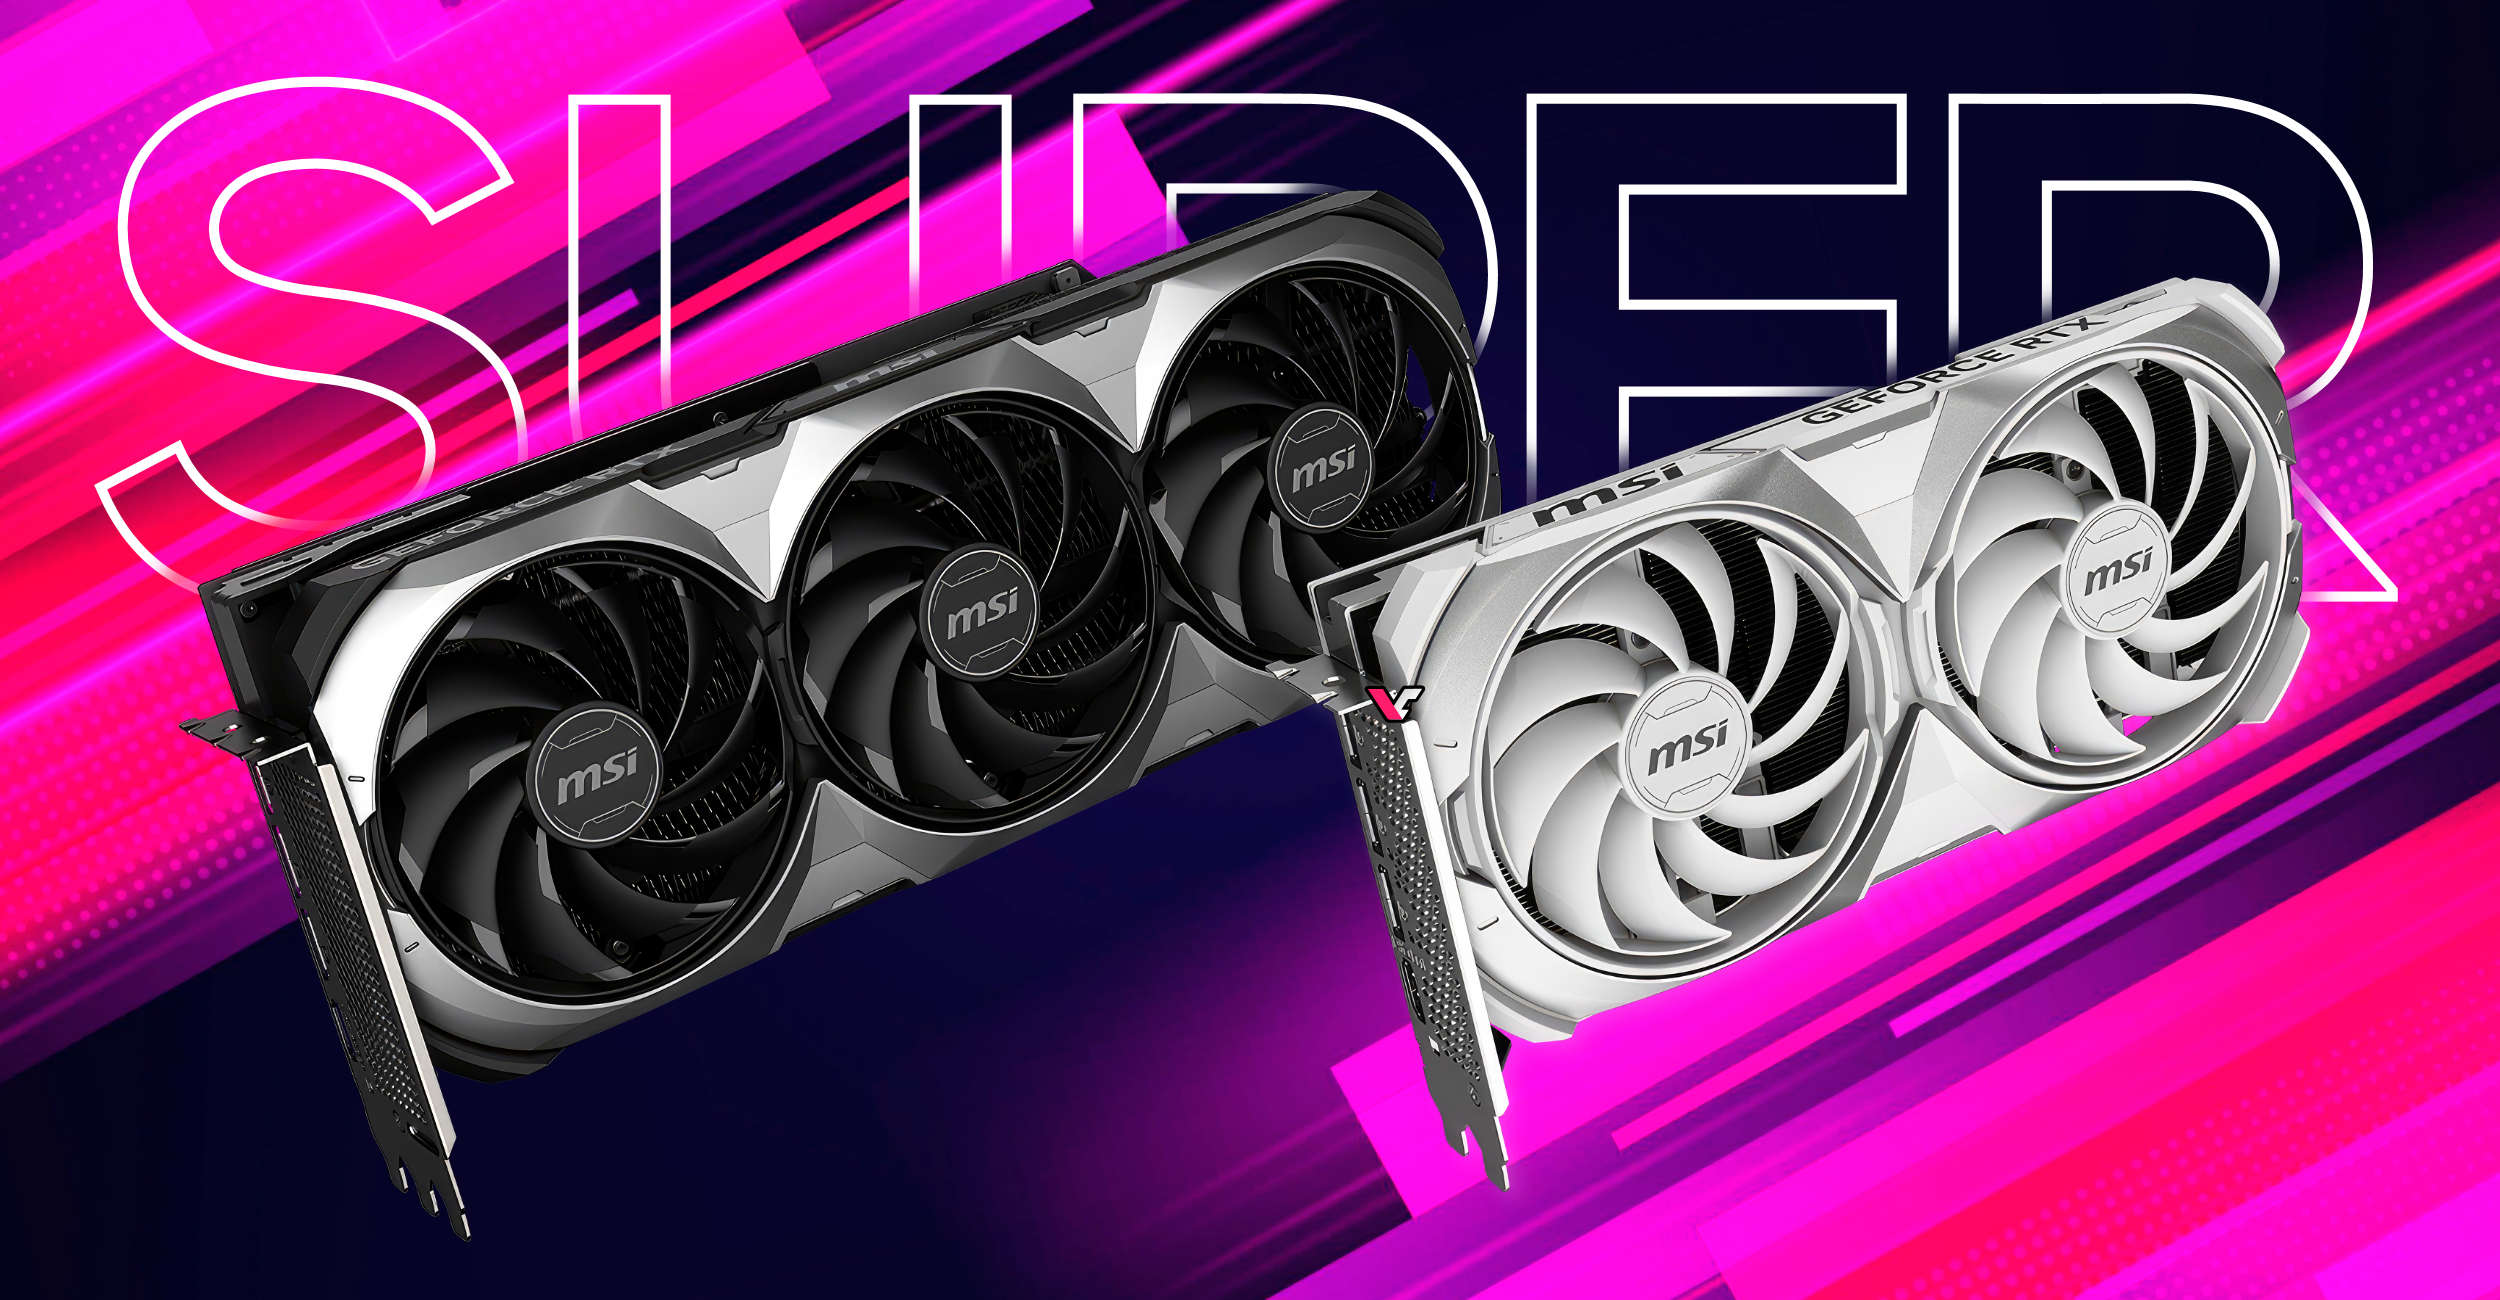 Custom GeForce RTX 4070 SUPER cards are showing up at retailers for up to $650